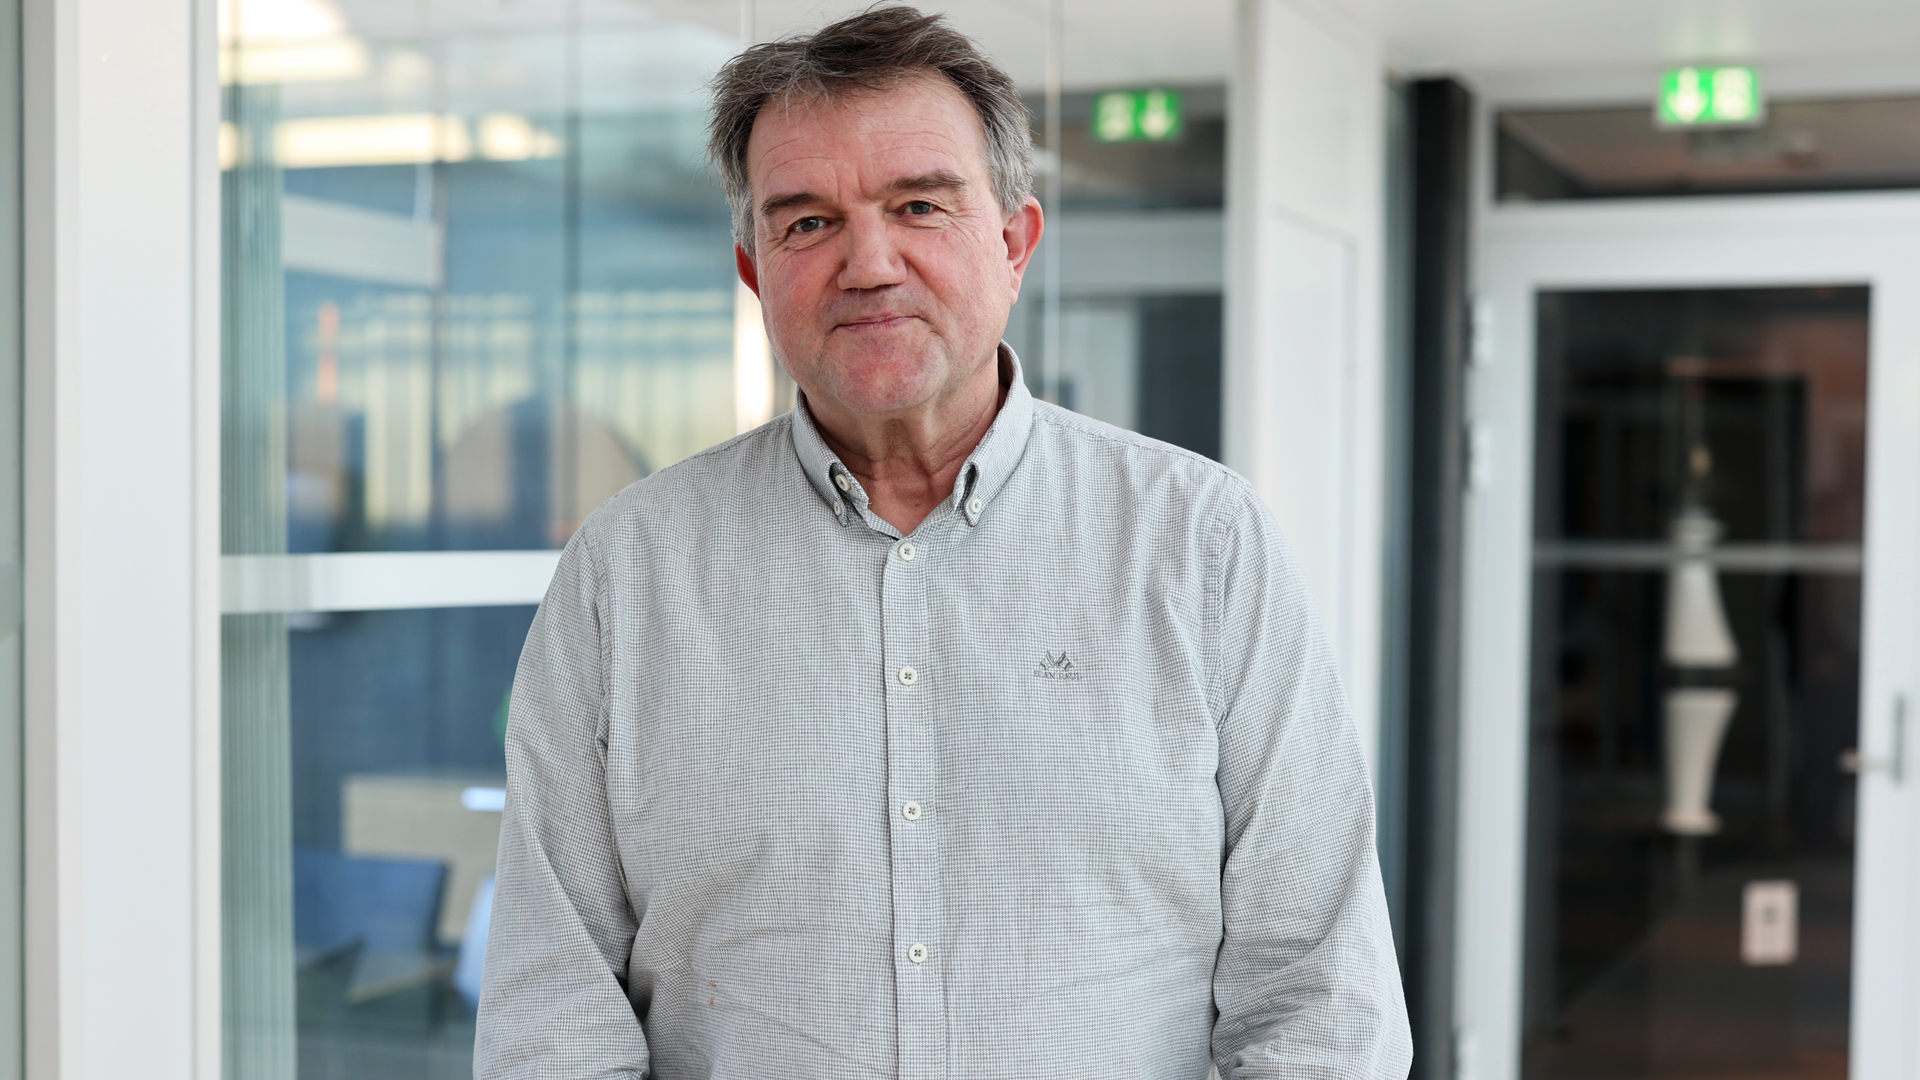 37 YEARS OF EXPERIENCE: Smedbold is Regional Director for Statkraft in Northern Norway until 1 April. He has been with the company since 1987. | Photo: Privat